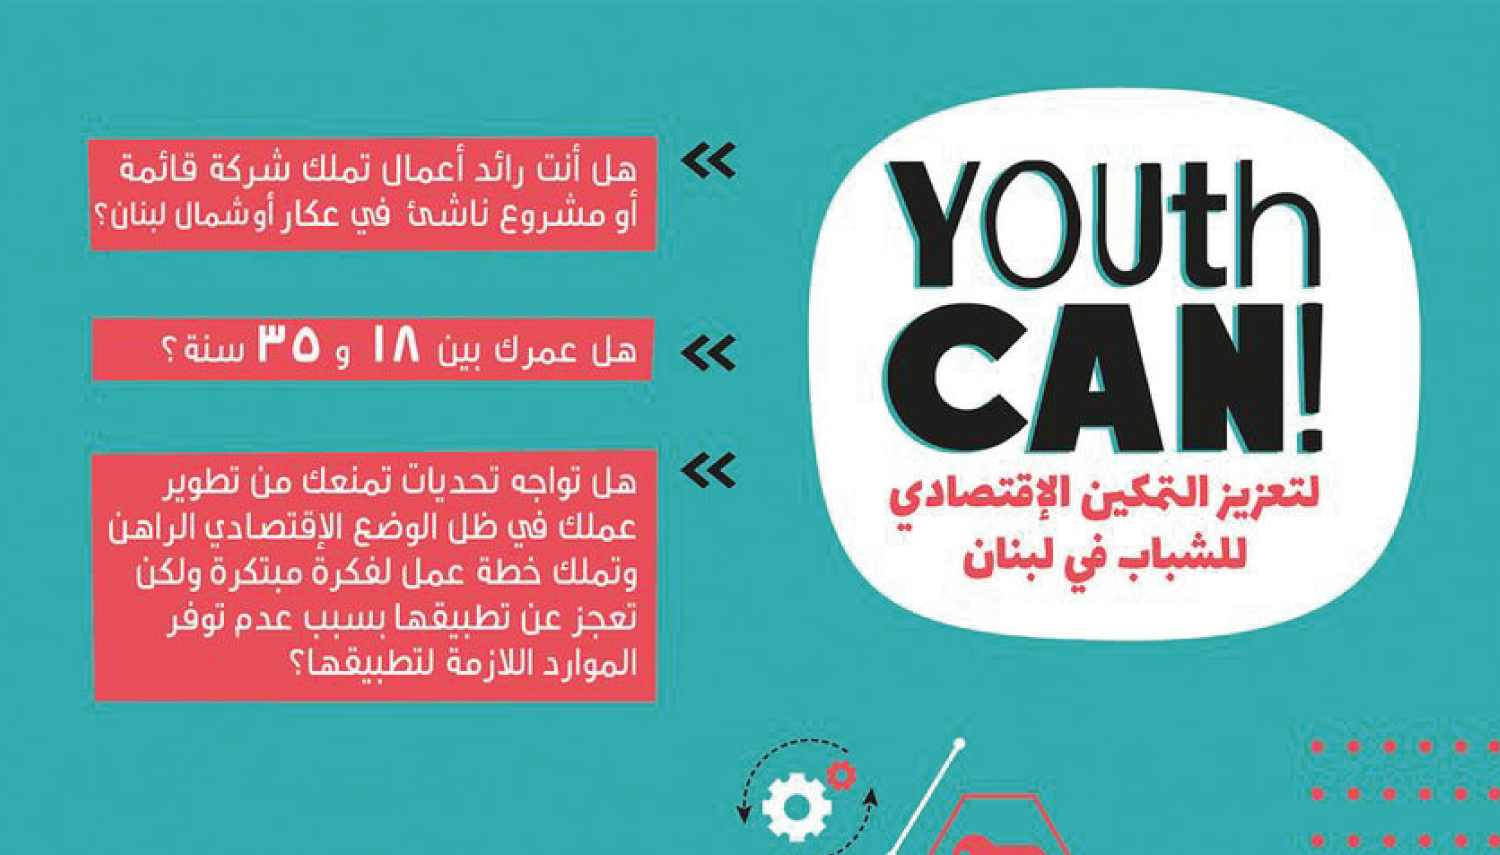 YOUth CAN! Promoting Youth Economic Empowerment in Lebanon